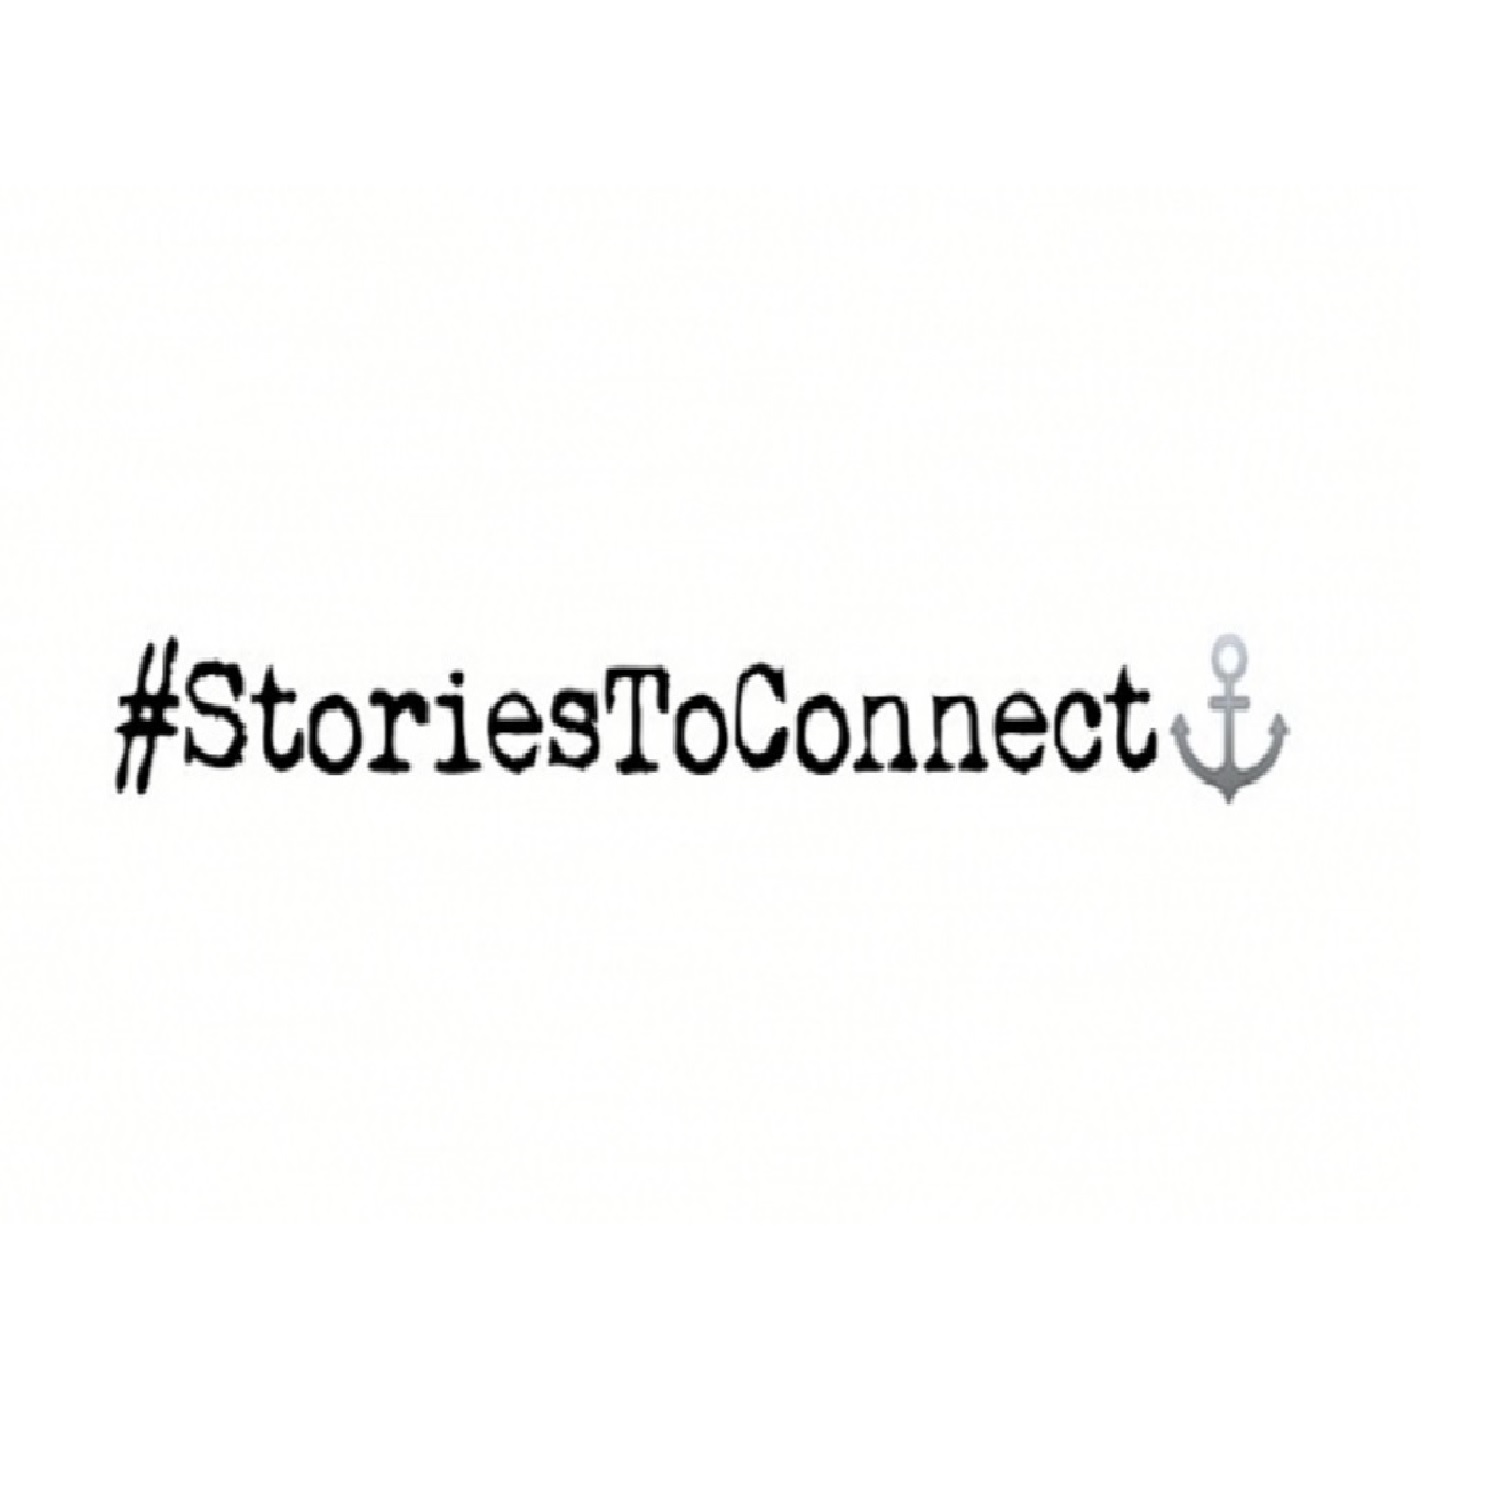 Stories to connect